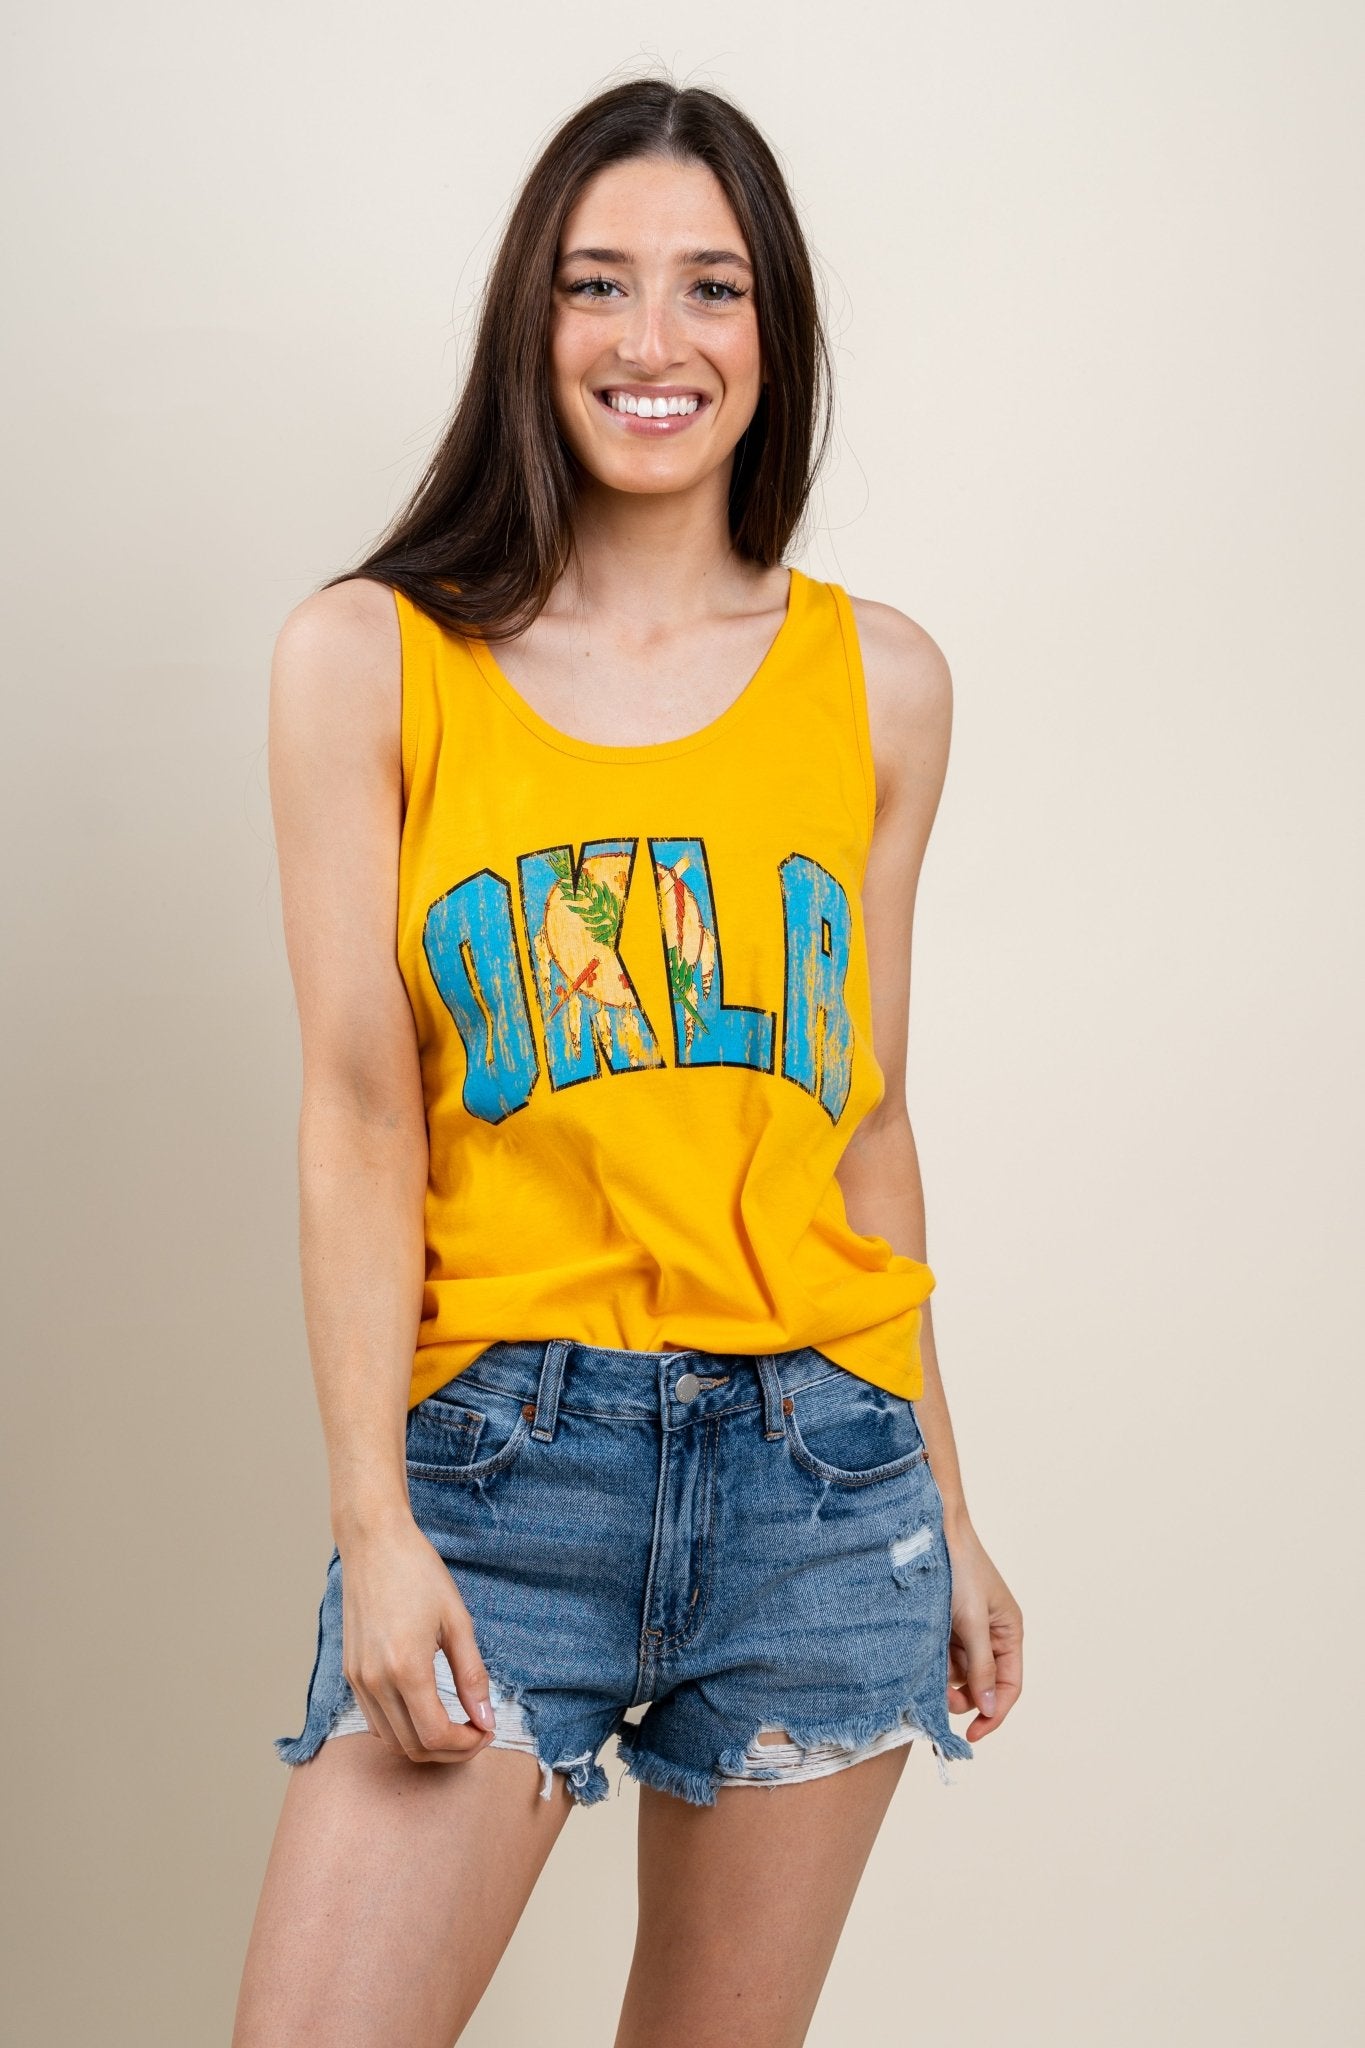 Okla flag tank top mustard - Affordable t-shirt - Boutique Tank Tops at Lush Fashion Lounge Boutique in Oklahoma City